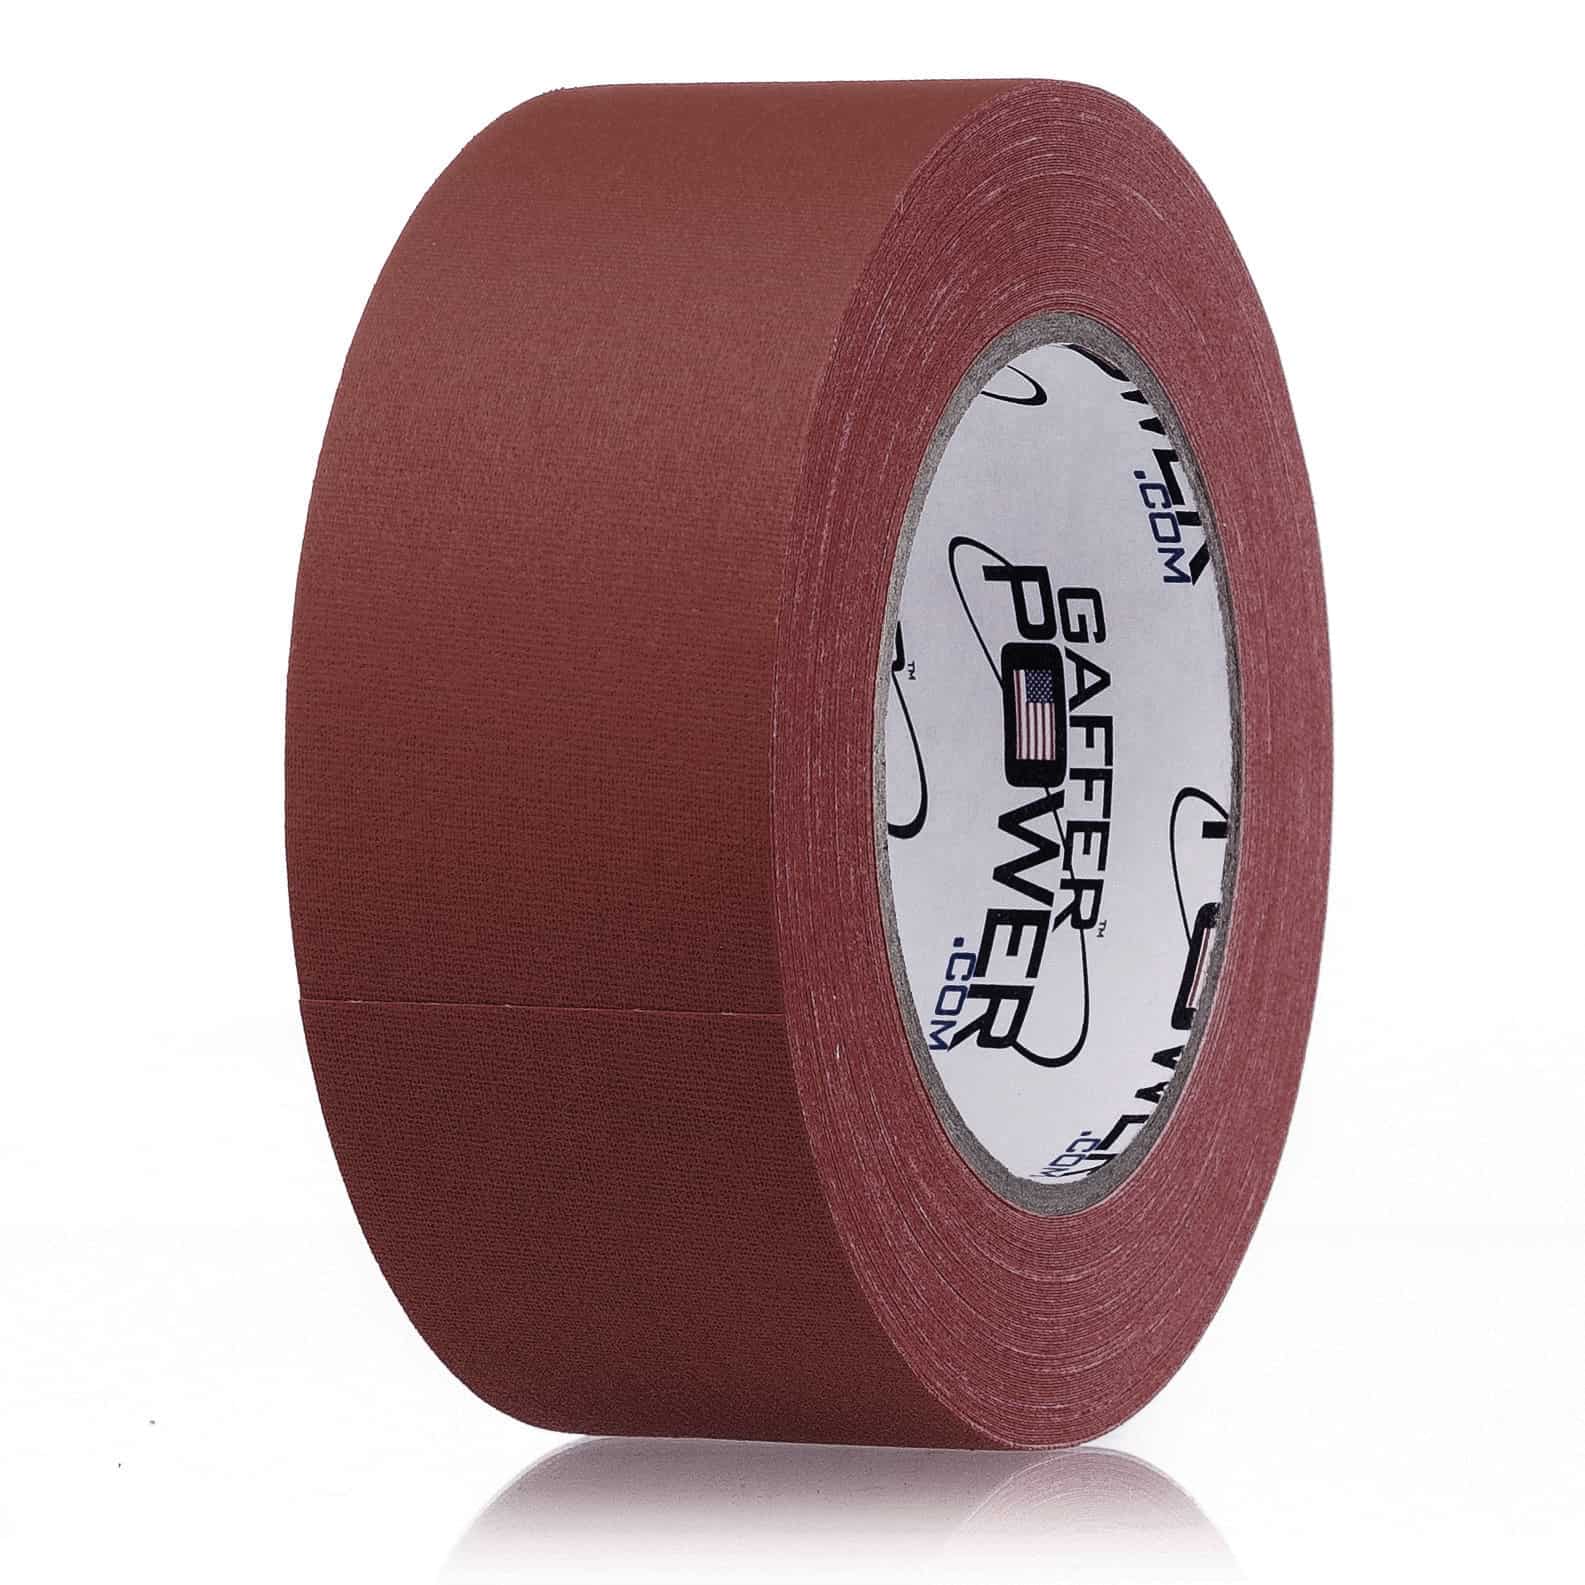 Gaffers Tape 2 Inch Black,Gaff Tape Non-Reflective Waterproof Gaff Tape  Black, Multipurpose Tape (Black,2in*90 ft)